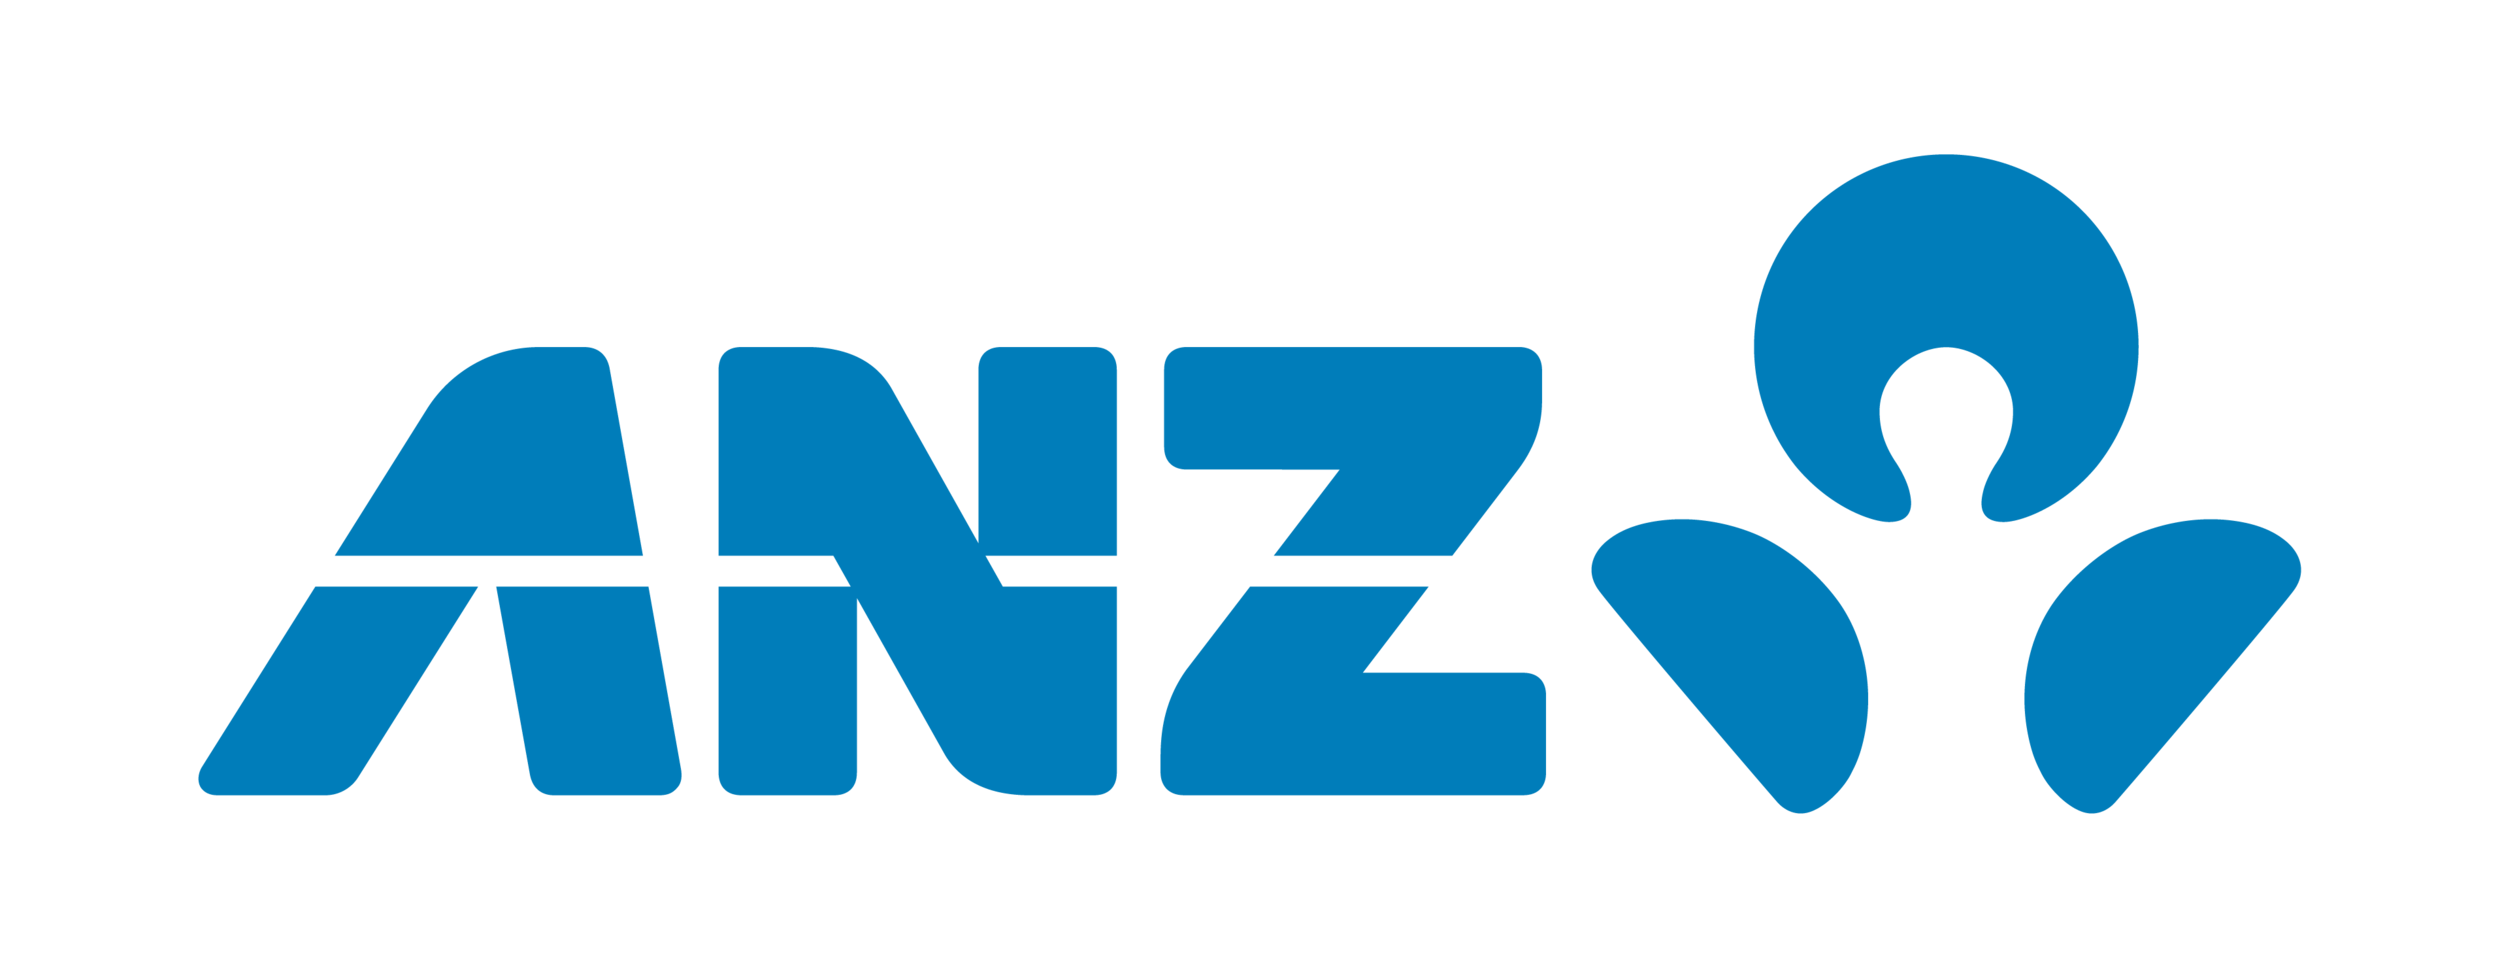 ANZ-01.png